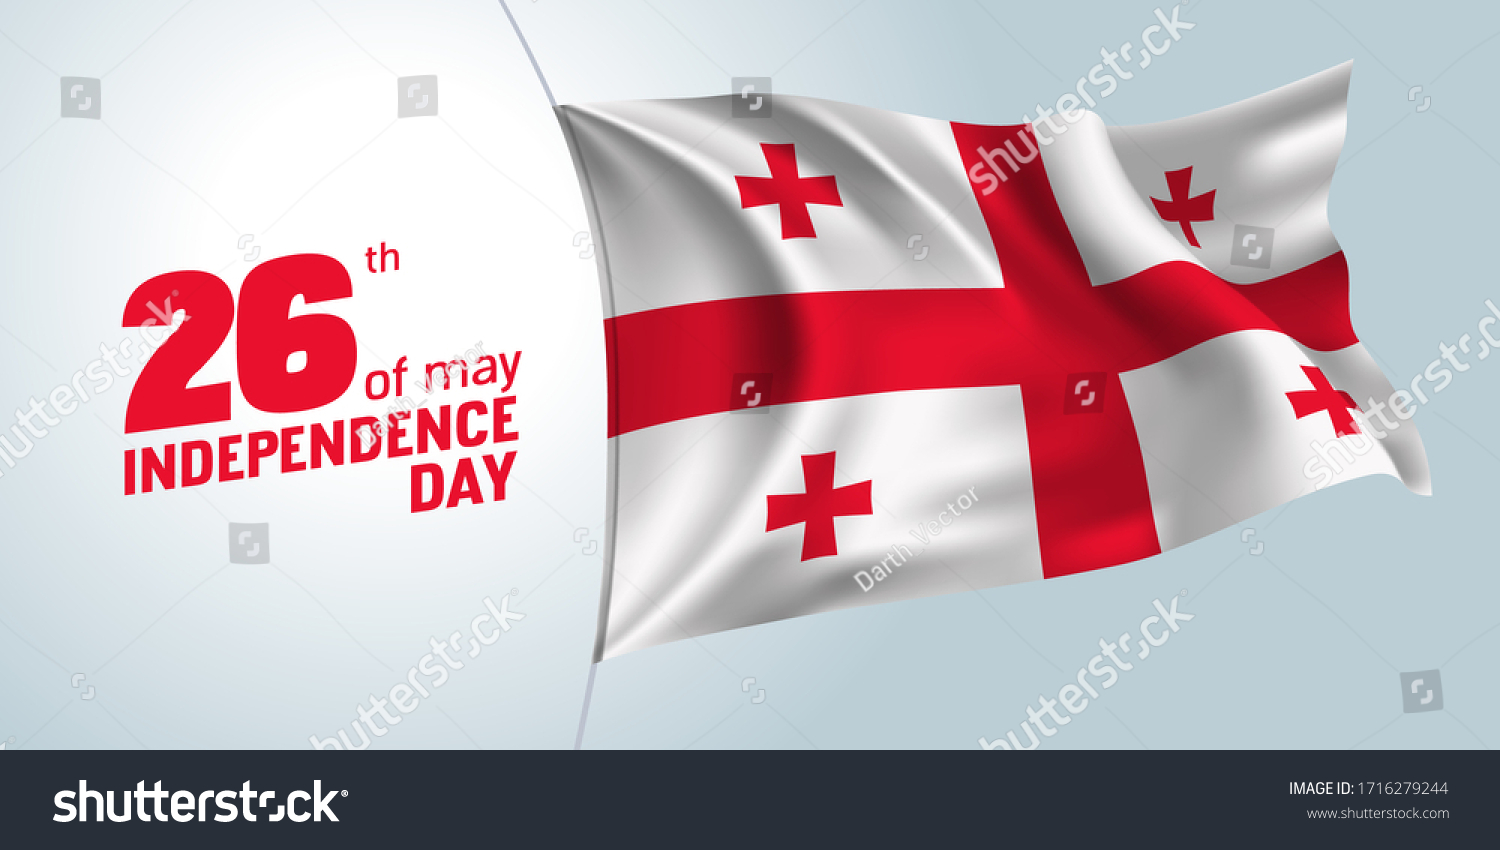 SVG of Georgia independence day greeting card, banner, vector illustration. Georgian holiday 26th of May design element with waving 3D flag on a flagpole as a symbol of independence svg